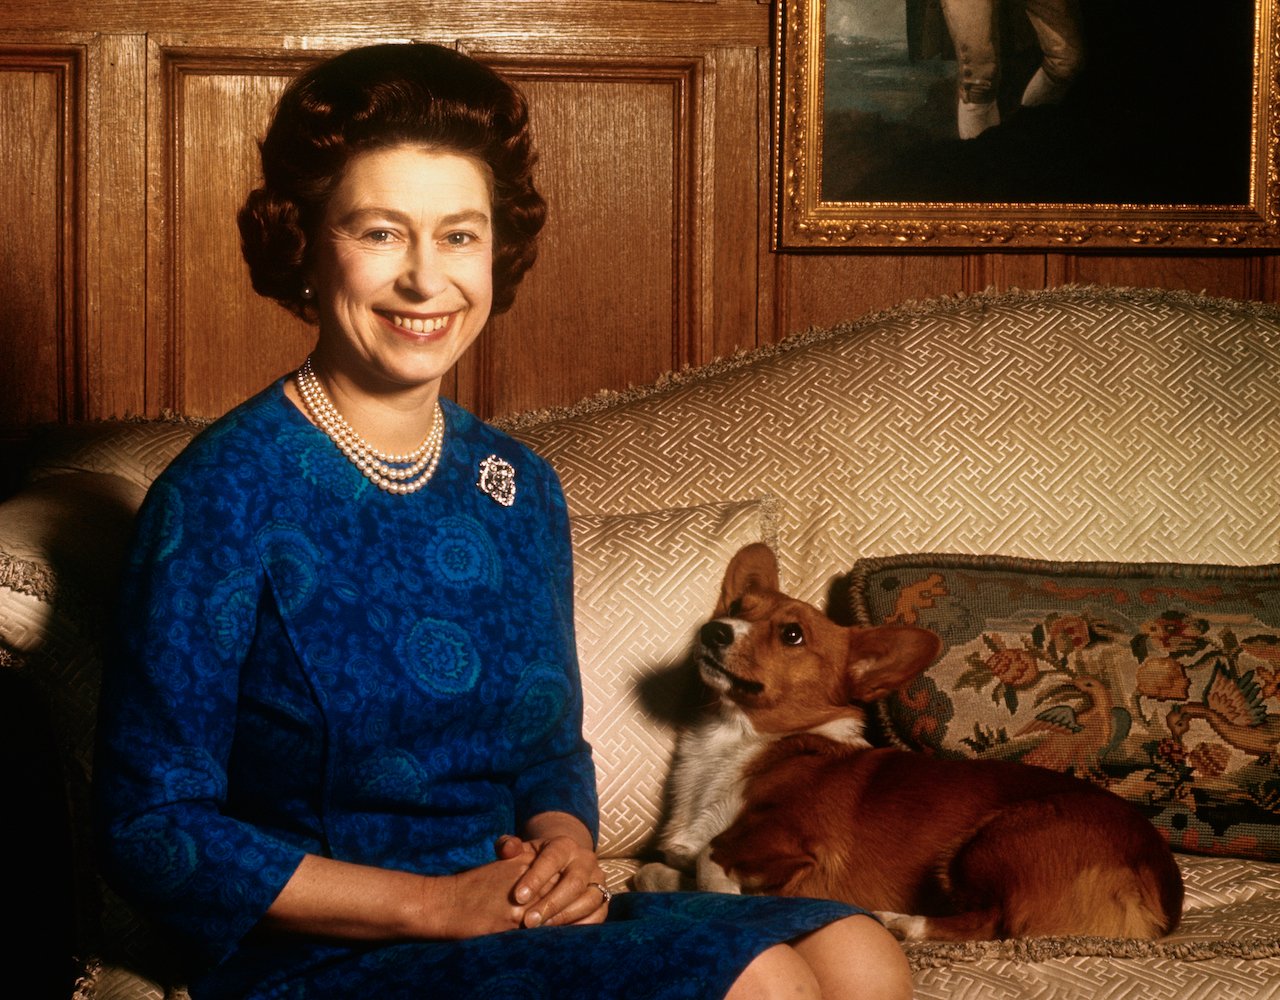 Queen Elizabeth II, pictured with a pet corgi c. 1970, owned a few corgis that would attack.